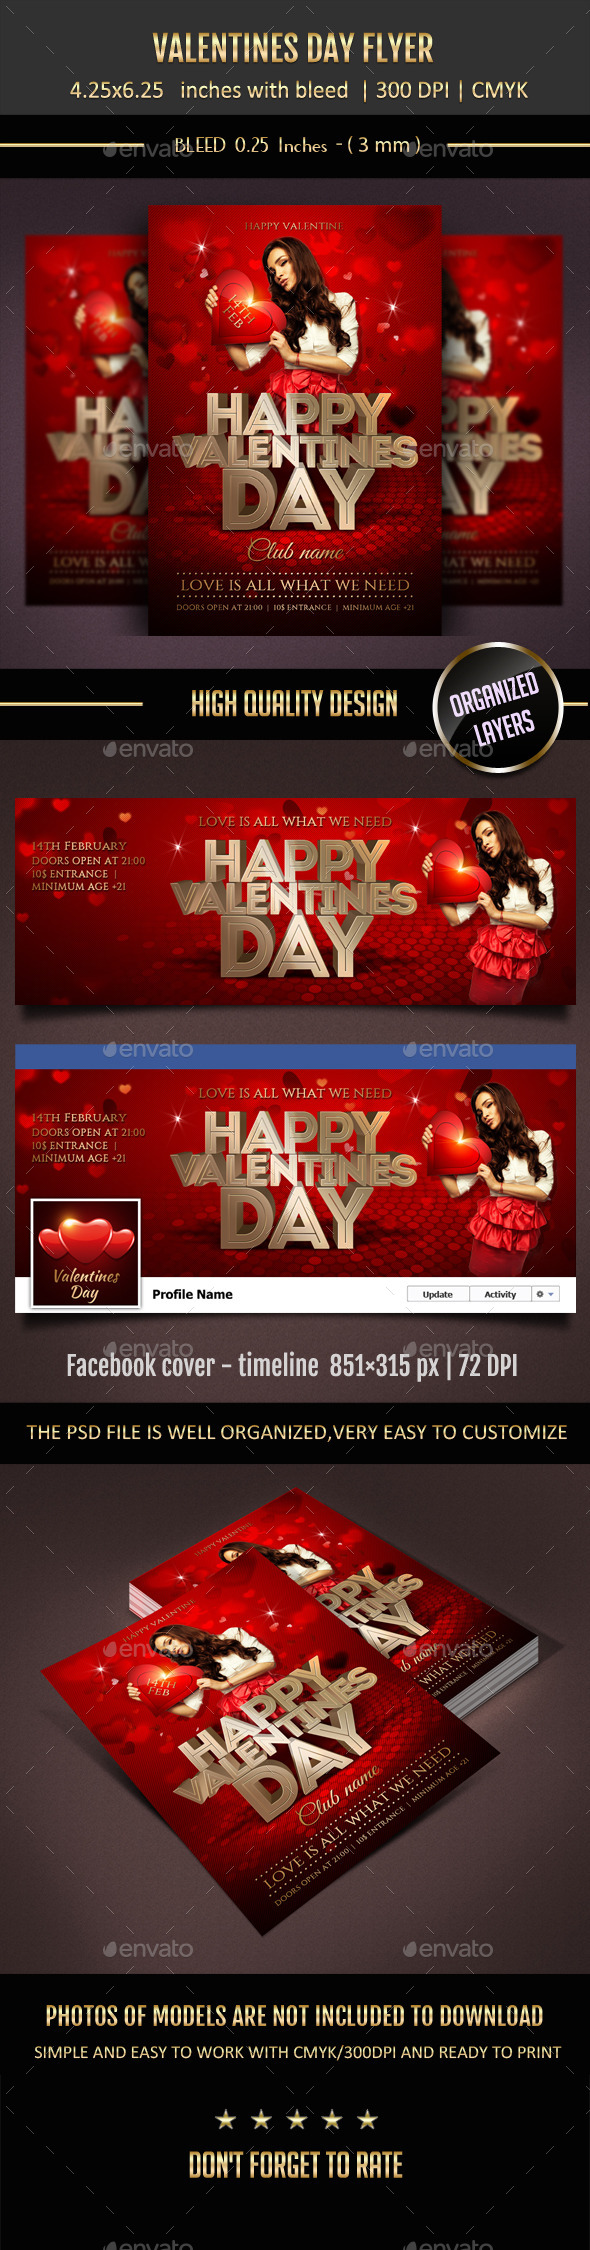 Valentines Day Flyer + Facebook Cover